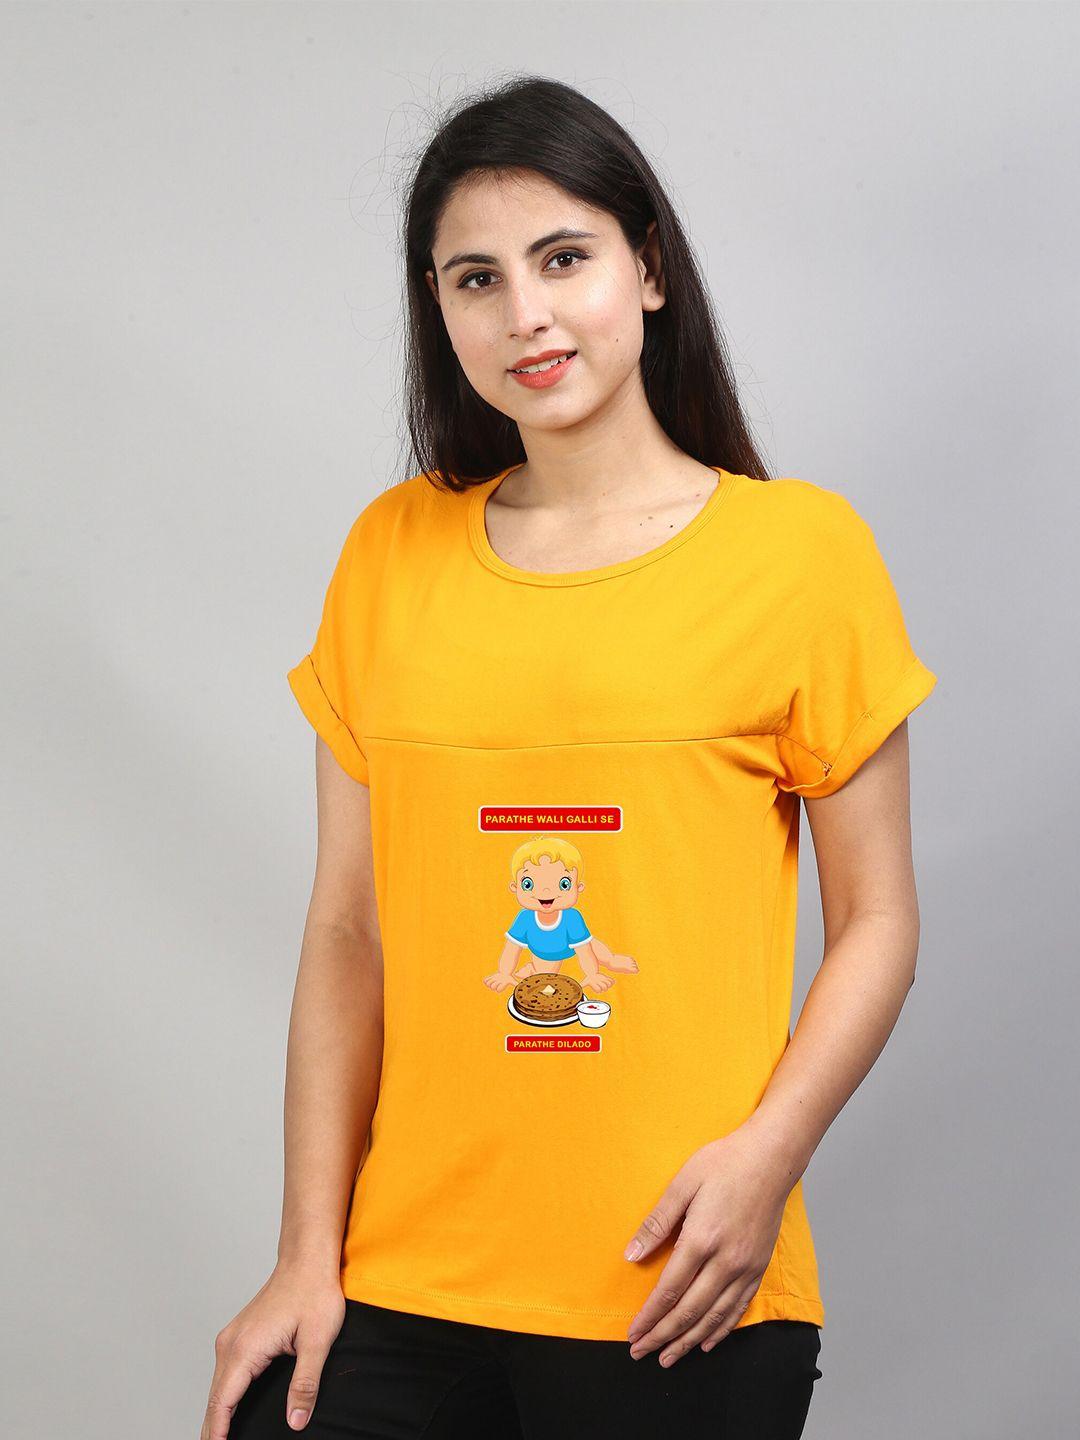 sillyboom graphic printed maternity and feeding t-shirt